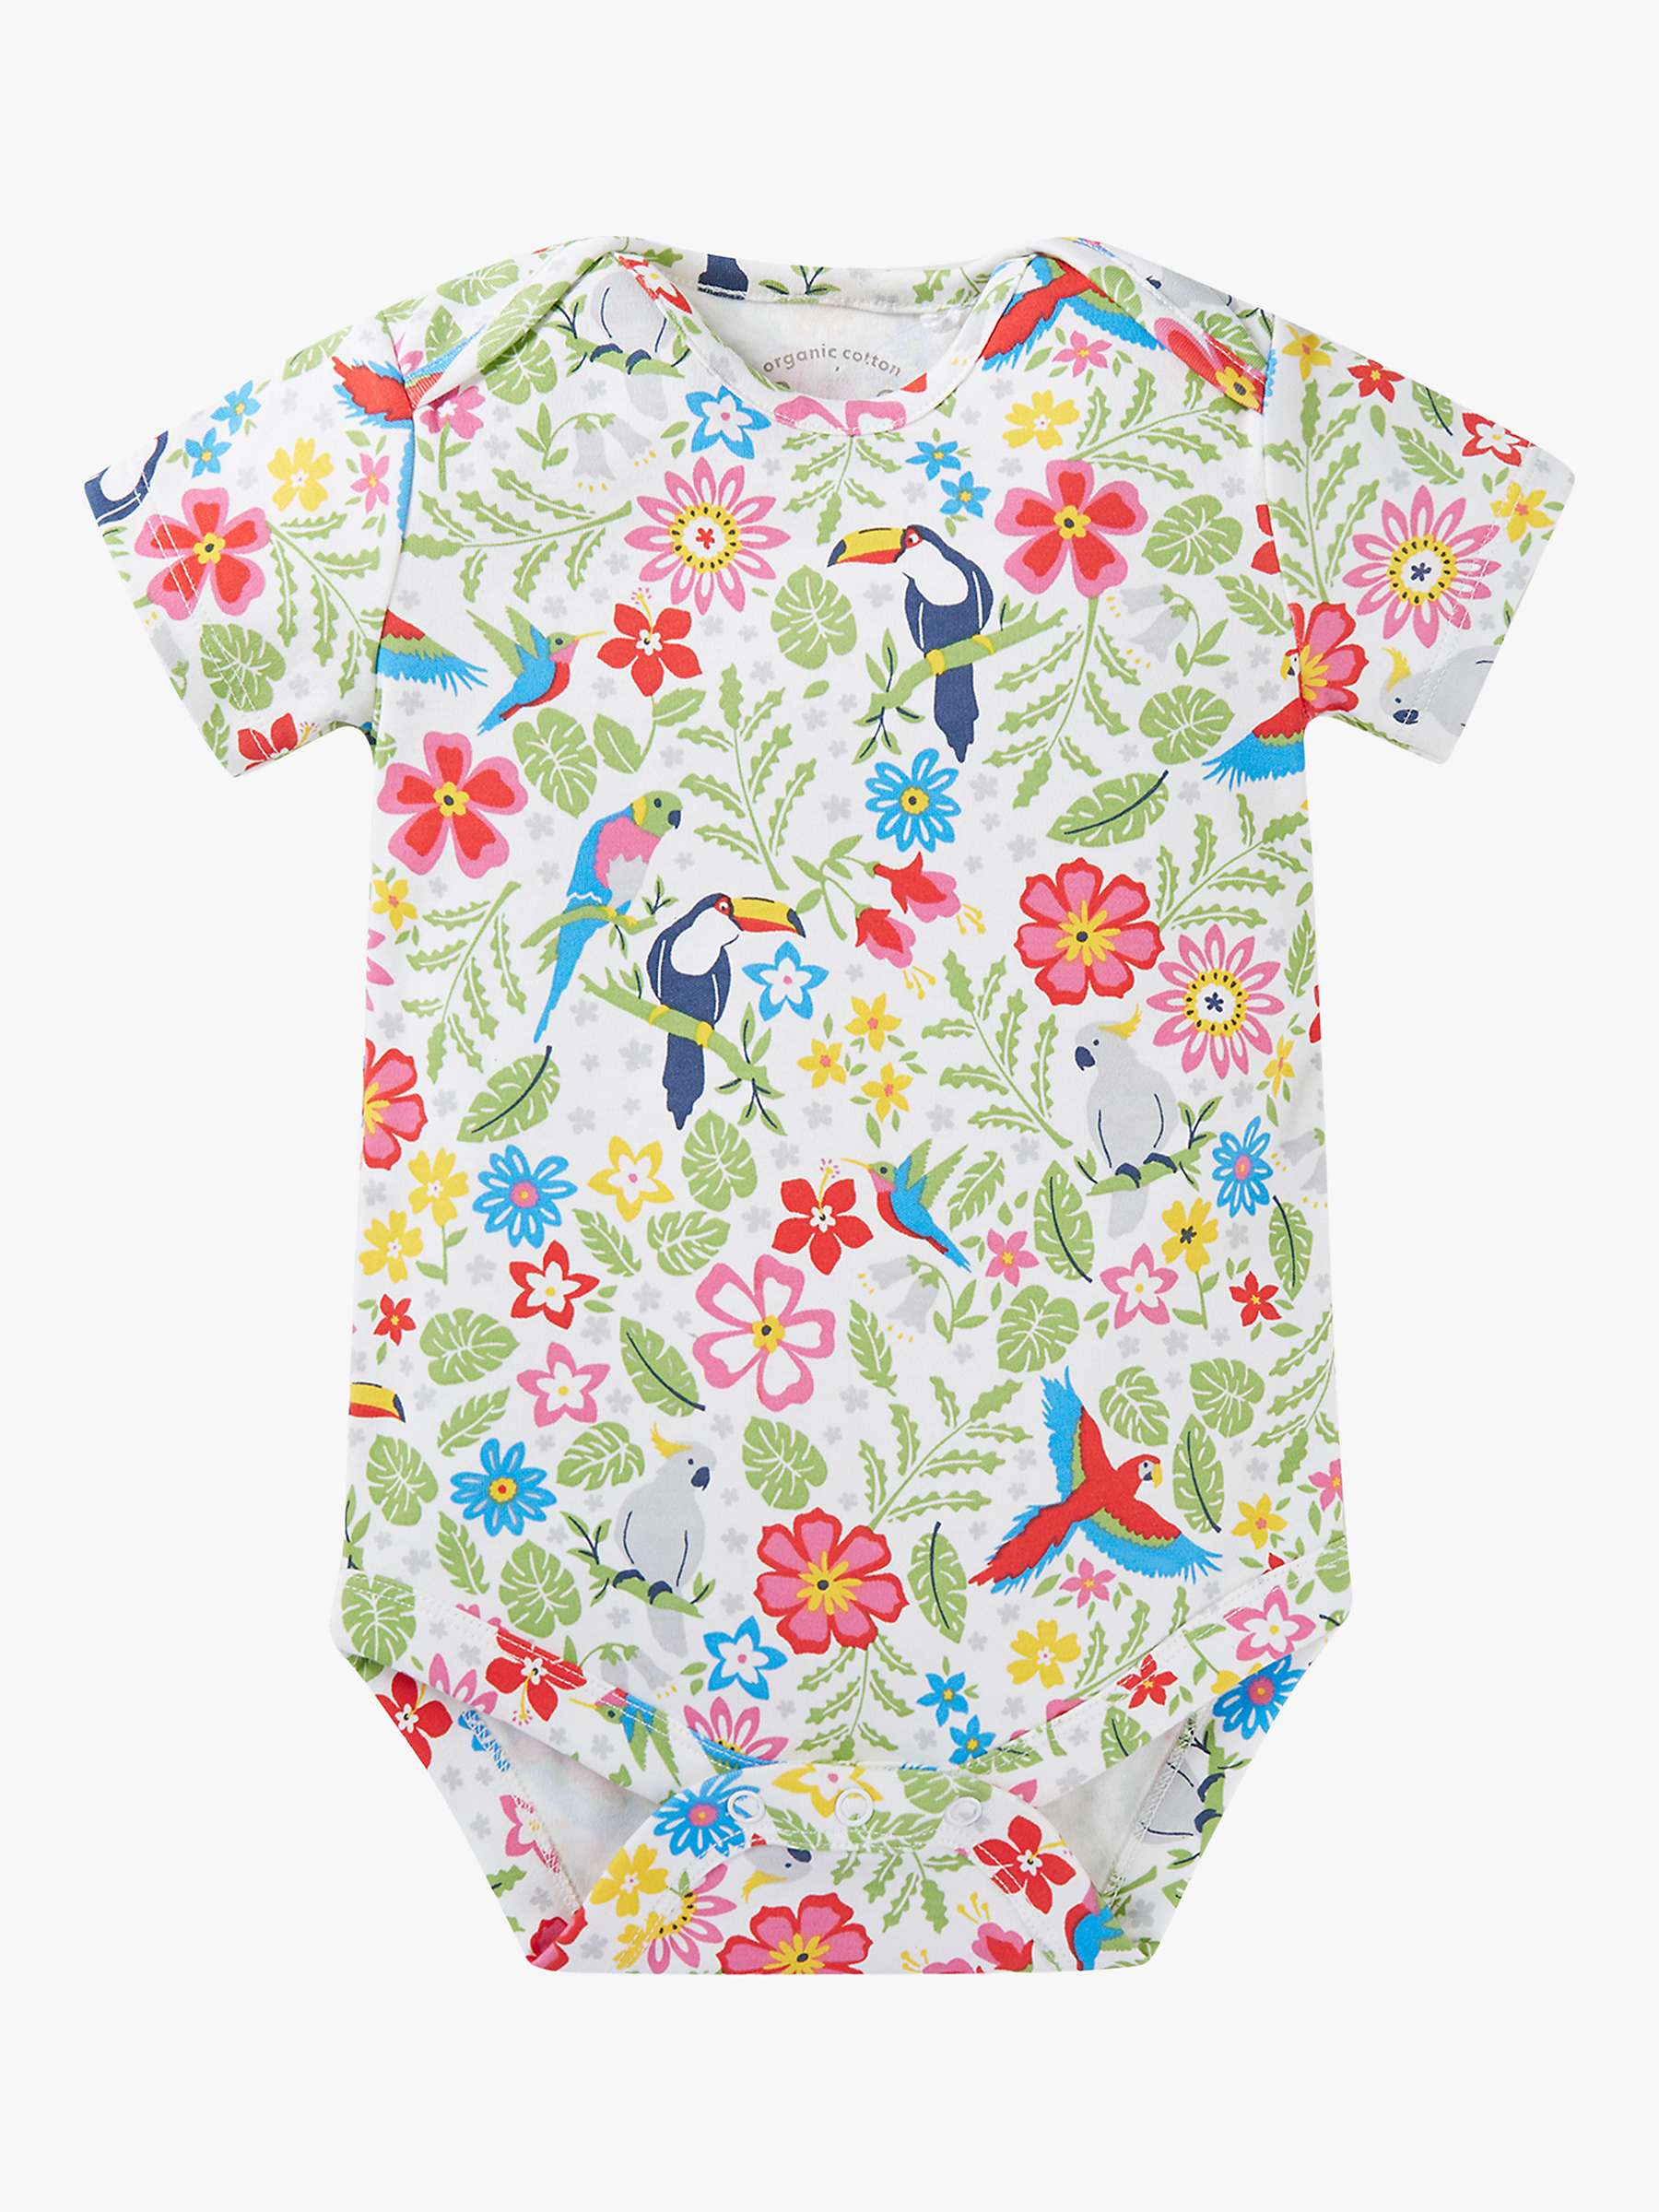 Buy Frugi Baby Super Special Tropical Birds & Stripe Organic Cotton Bodysuits, Pack of 2, Multi Online at johnlewis.com